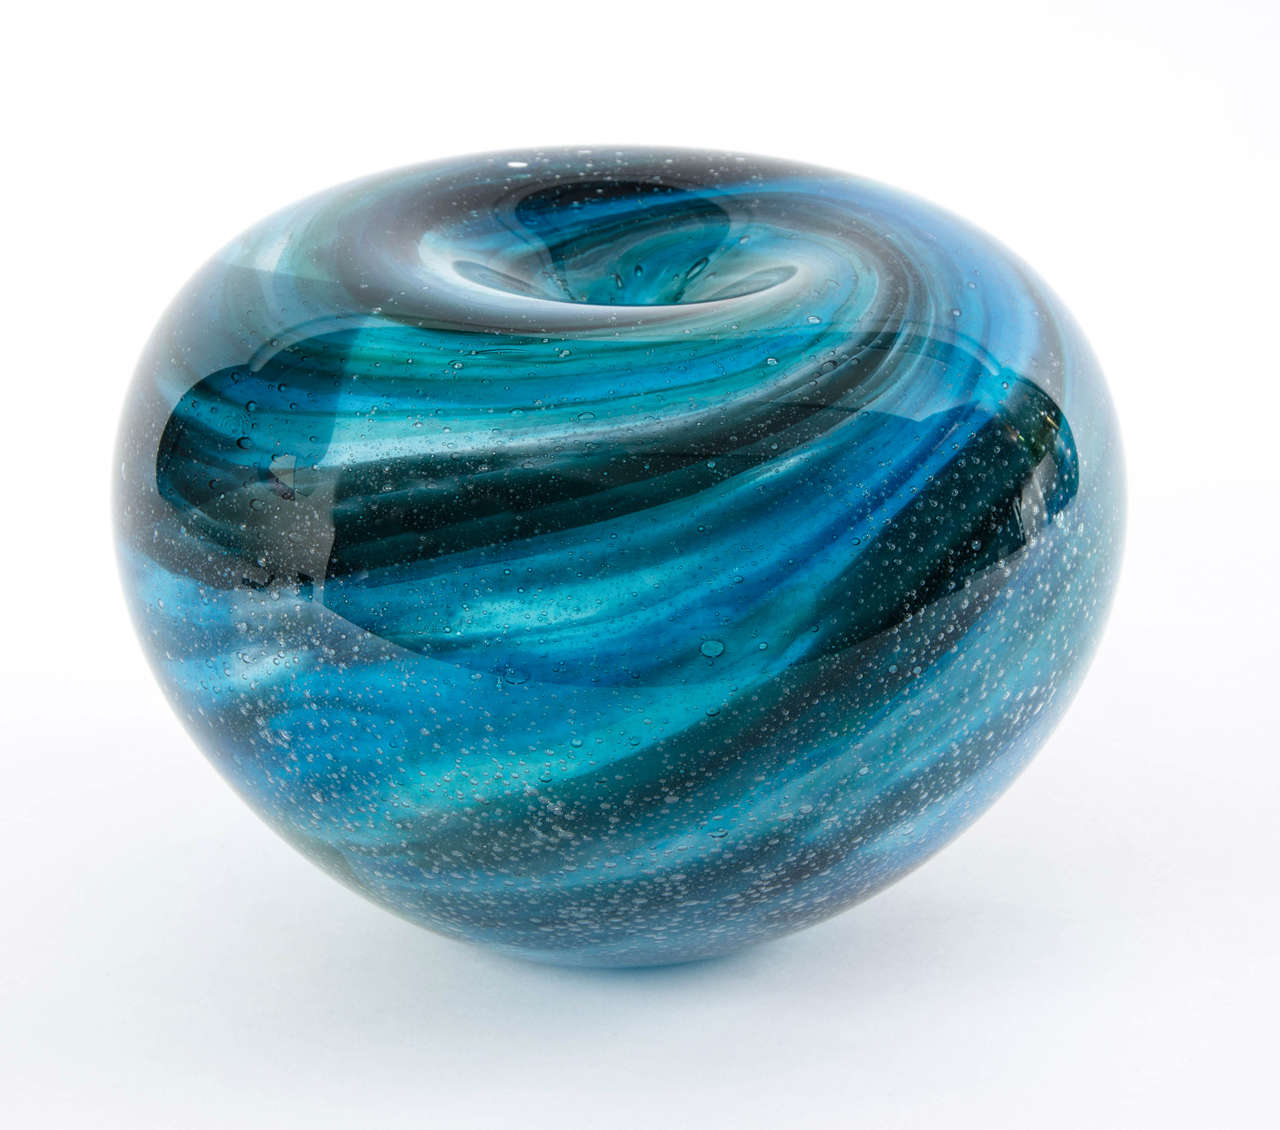 Heavy blown glass sculpture with multi layers of colors.